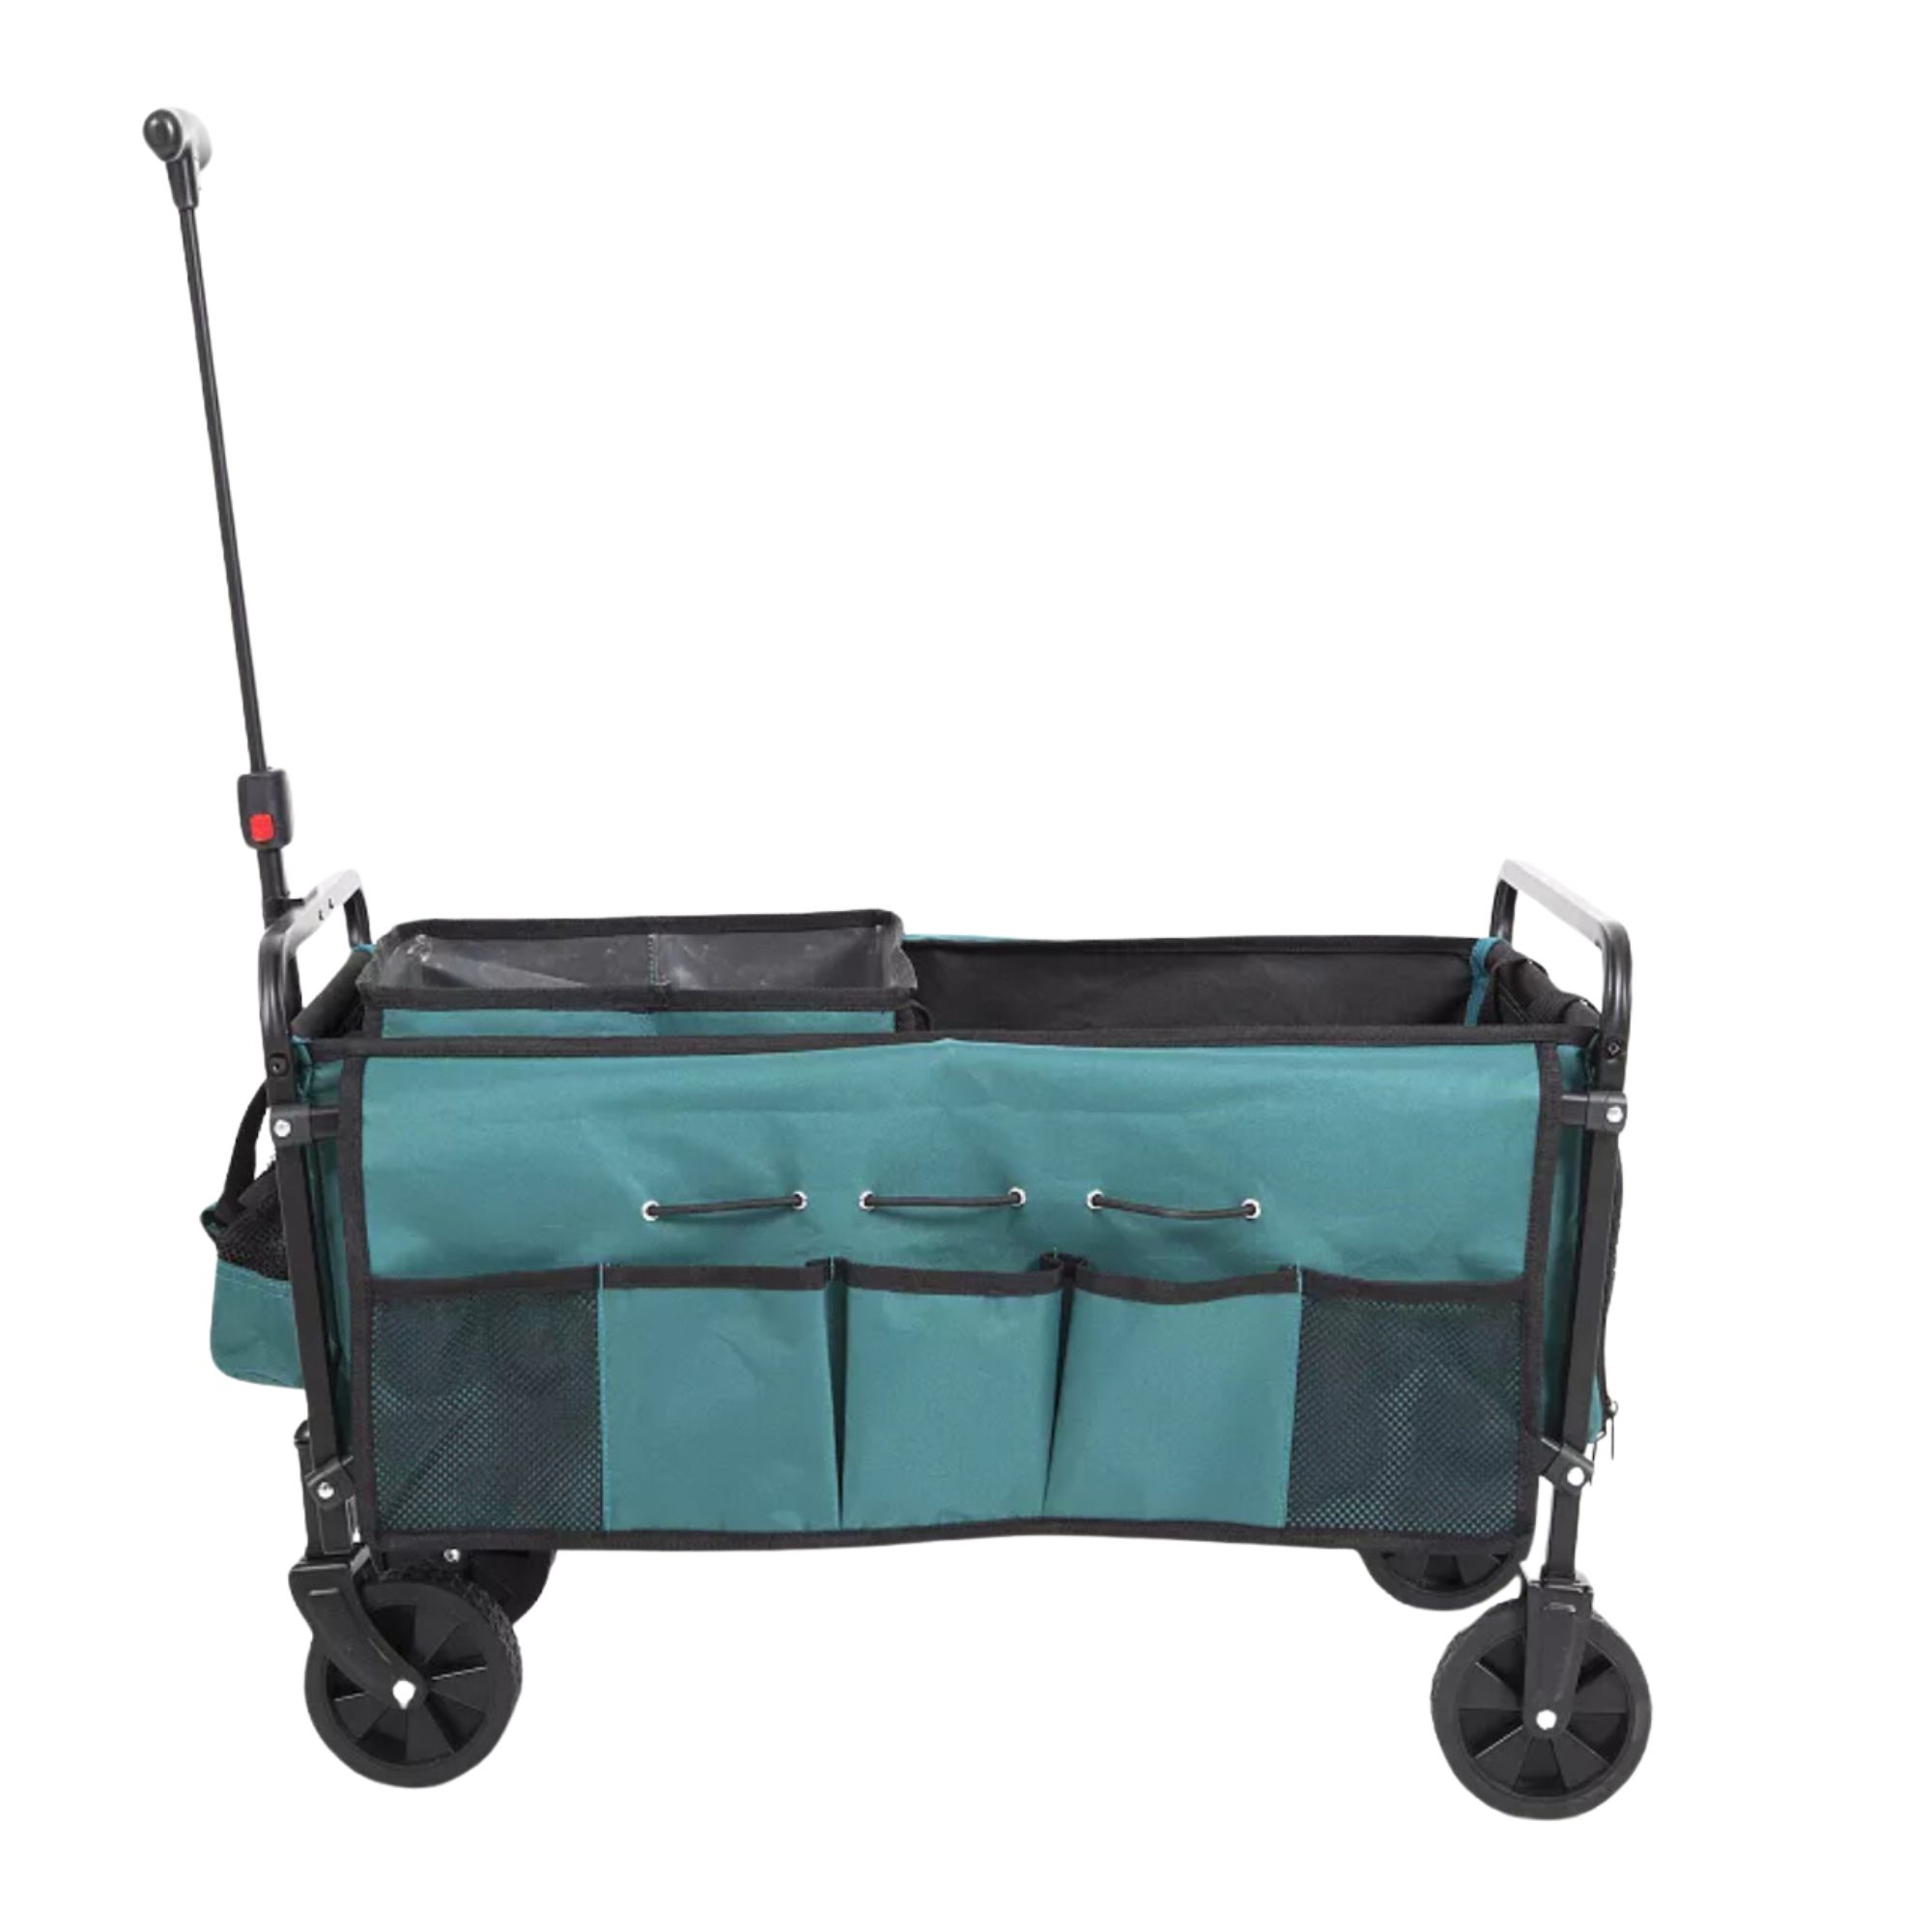 A green gardening cart with fabric lining that has pockets